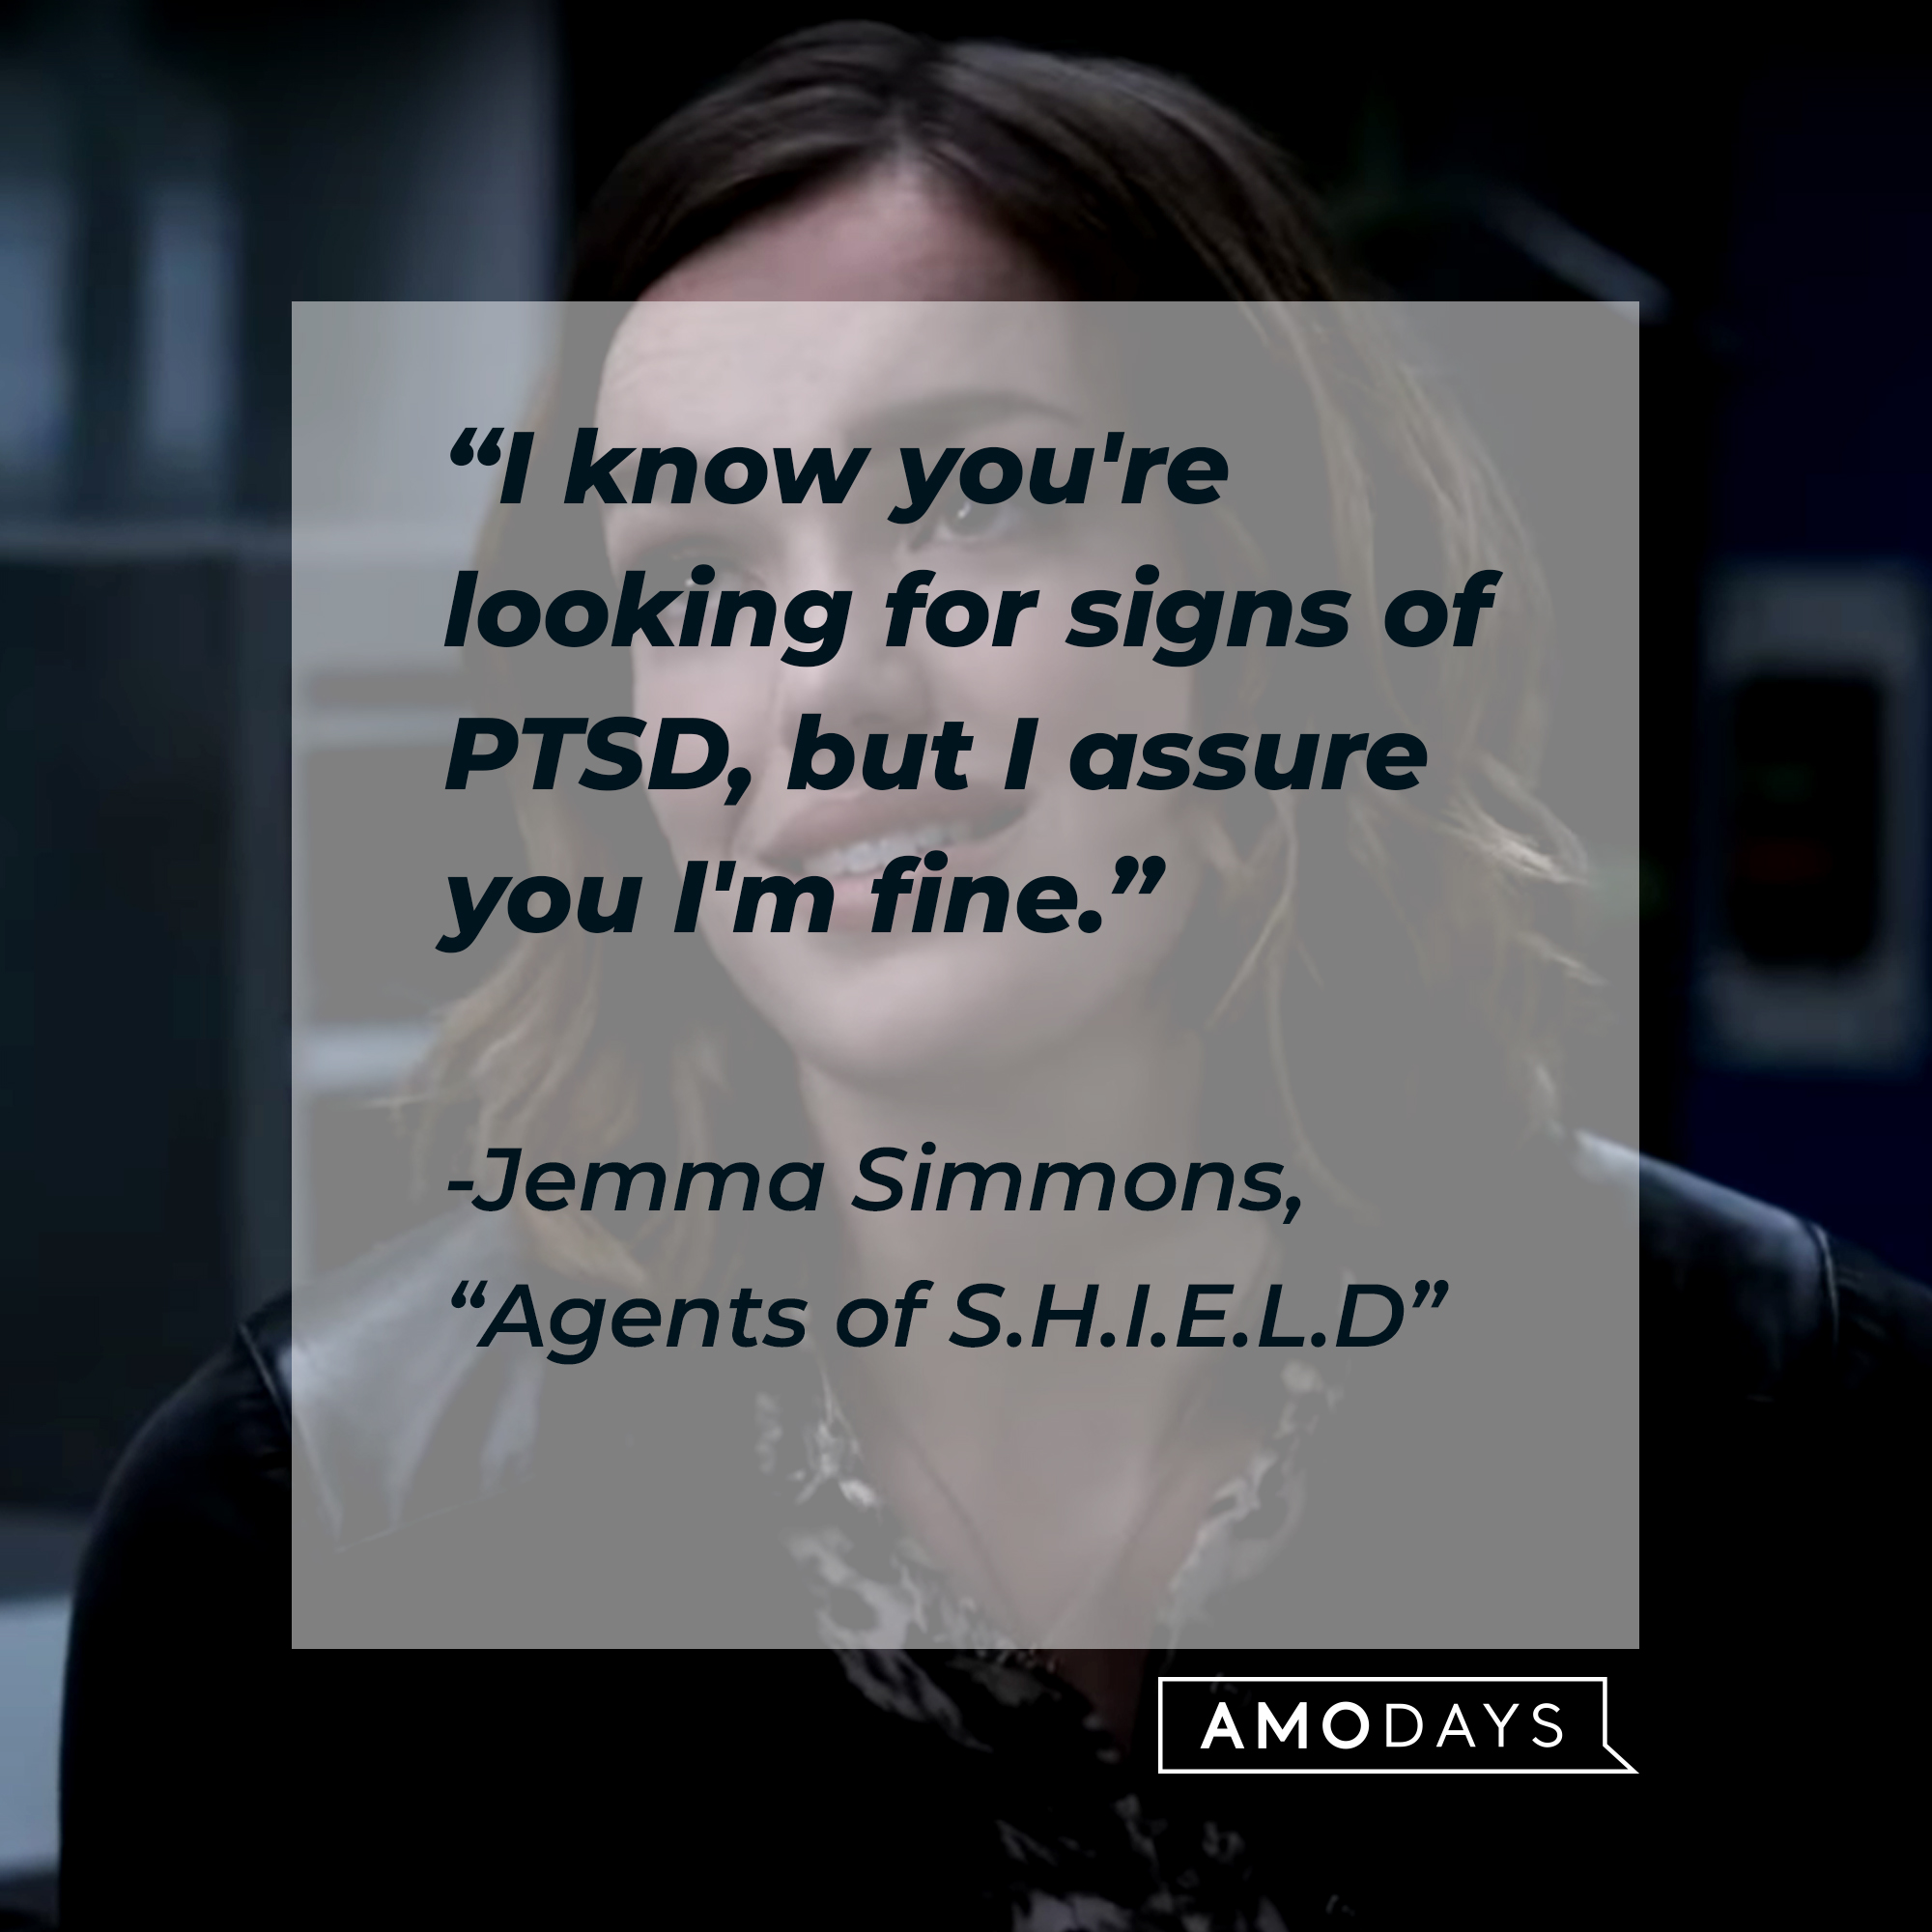 Jemma Simmons with her quote from "Agents of S.H.I.E.L.D.:" “I know you're looking for signs of PTSD, but I assure you I'm fine.” | Source: Facebook.com/AgentsofShield